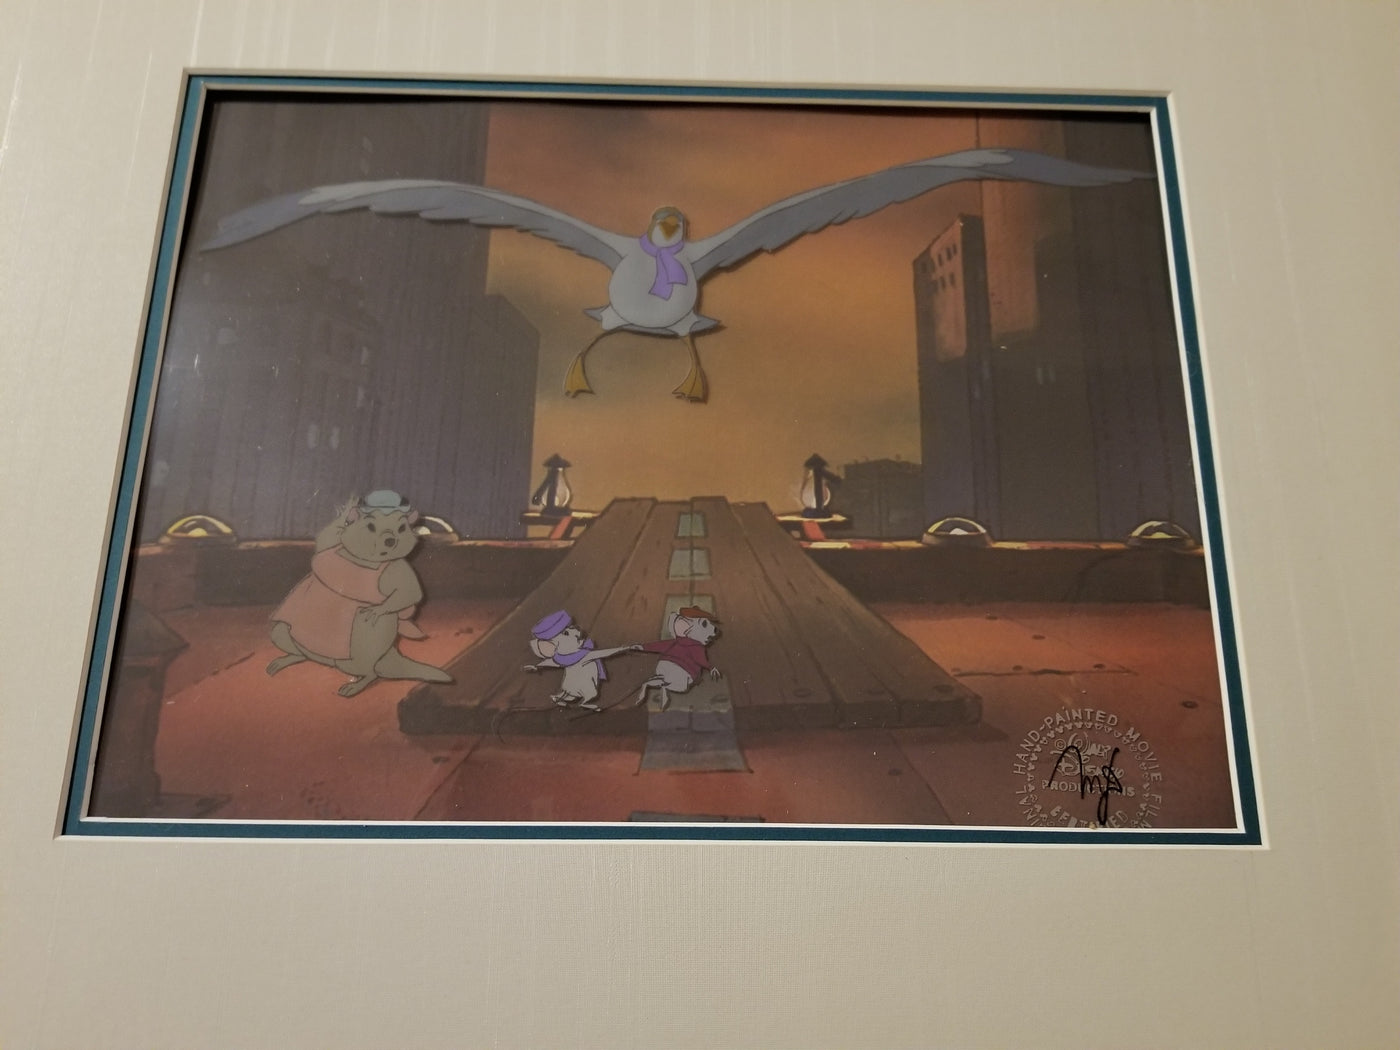 Original Walt Disney Production Cel from The Rescuers featuring Bernard, Bianca, Orville and others